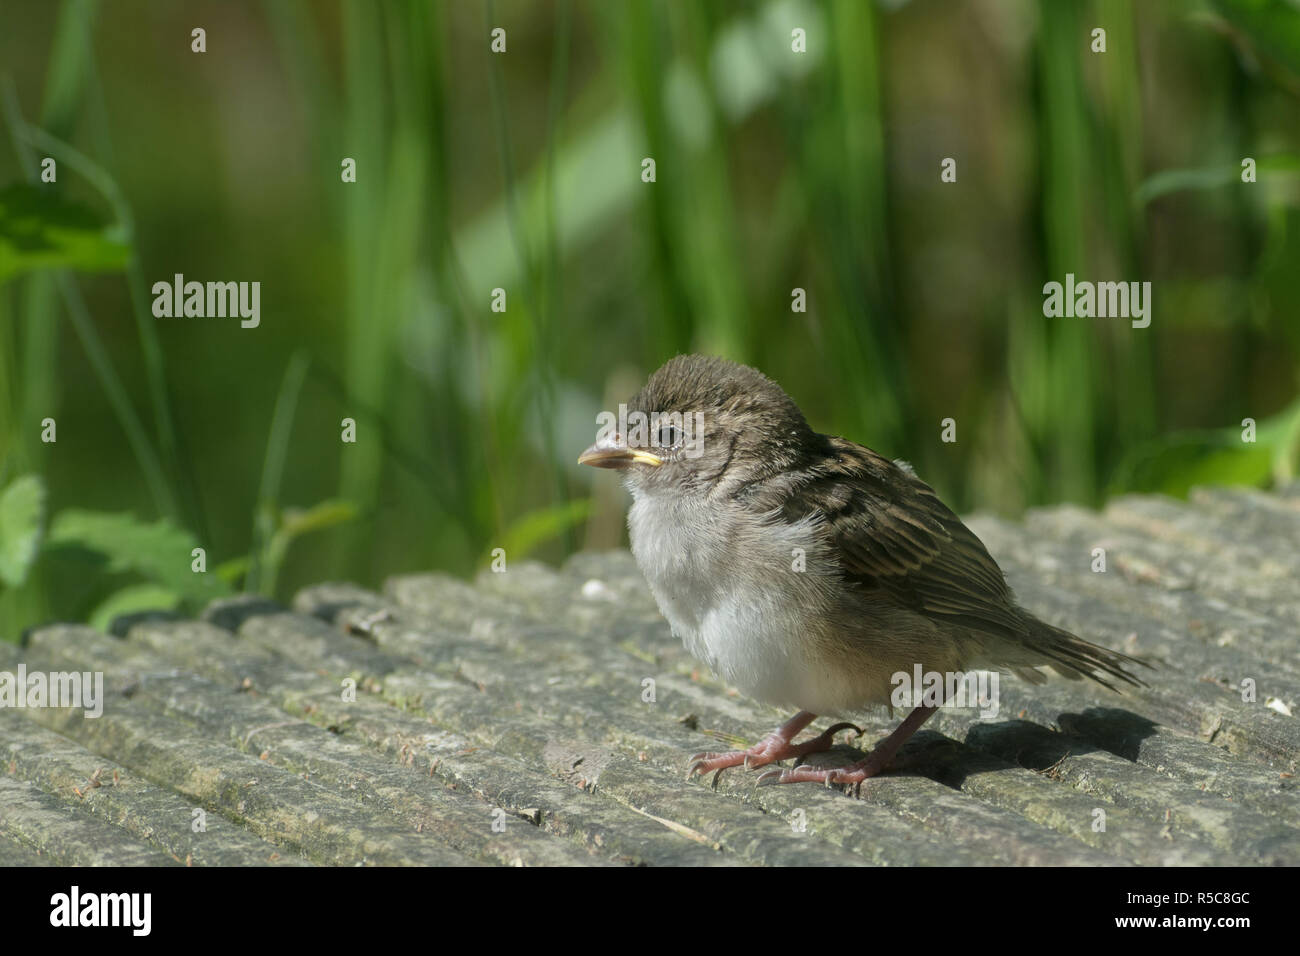 young house sparrow fledgling (Passer domesticus), a cute baby bird on a walk over a wooden footpath, blurry green background with copy space, selecte Stock Photo